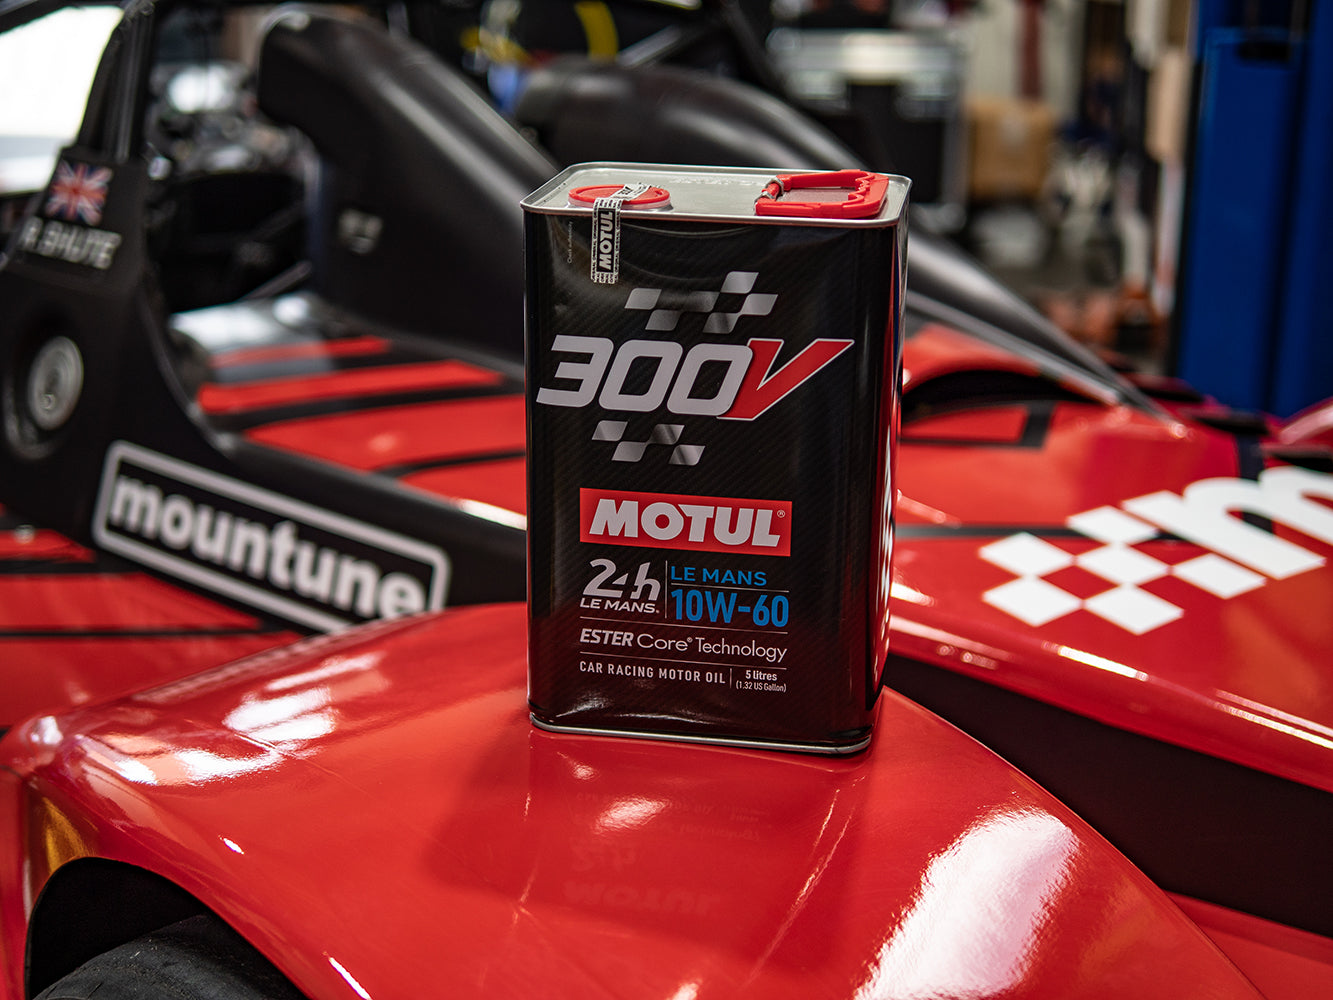 MOTUL 300V — WHEN THERE'S NO ROOM FOR COMPROMISE –